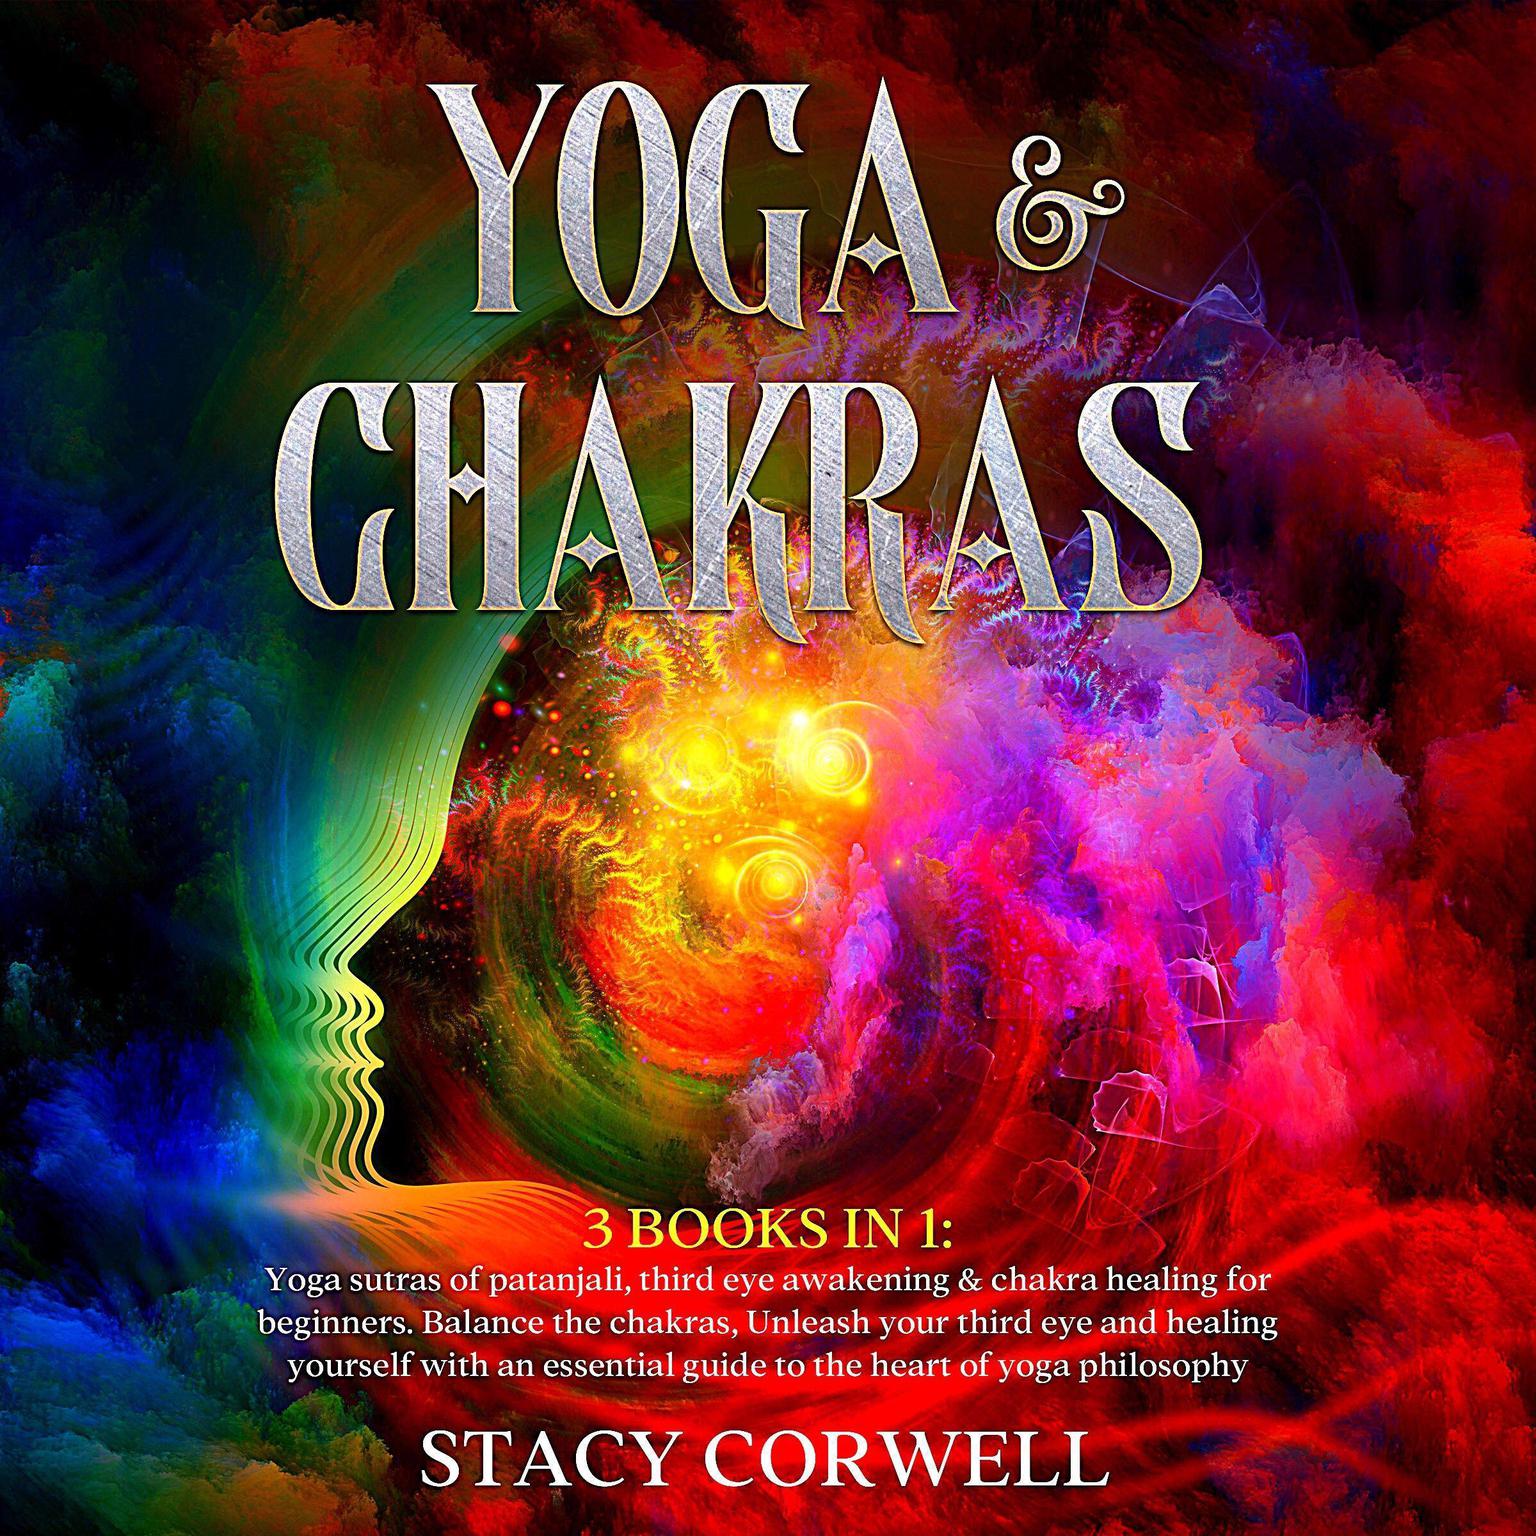 Yoga & Chakras: 3 Books in 1: Yoga Sutras of Patanjali, Third Eye Awakening & Chakra Healing for Beginners. Balance the Chakras, Unleash Your Third Eye and Healing Yourself with an Essential Guide to the Heart of Yoga Philosophy Audiobook, by Stacy Corwell